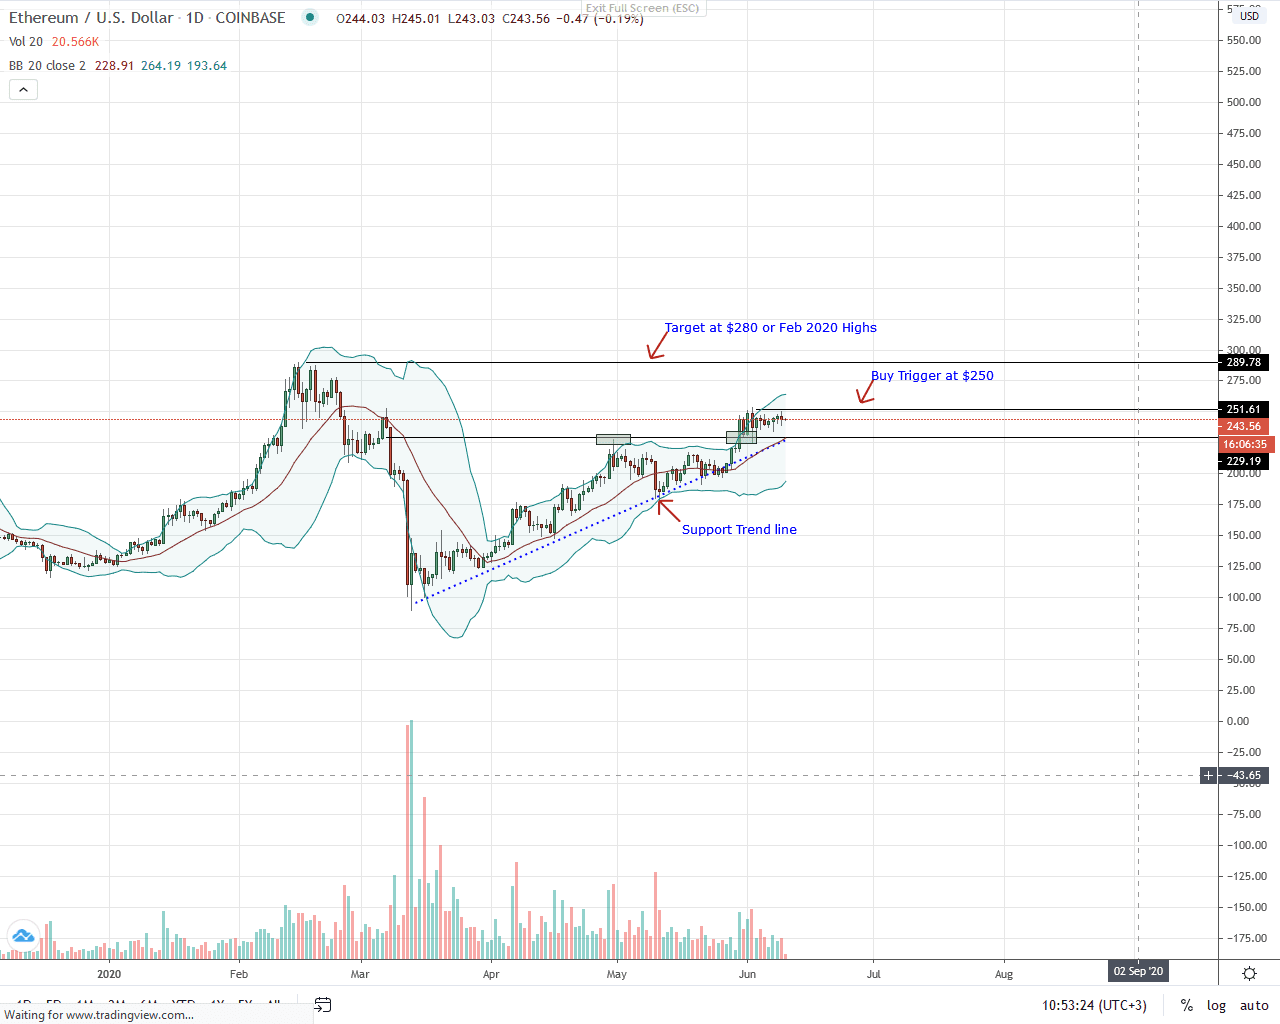 Ethereum Daily Chart for June 10, 2020